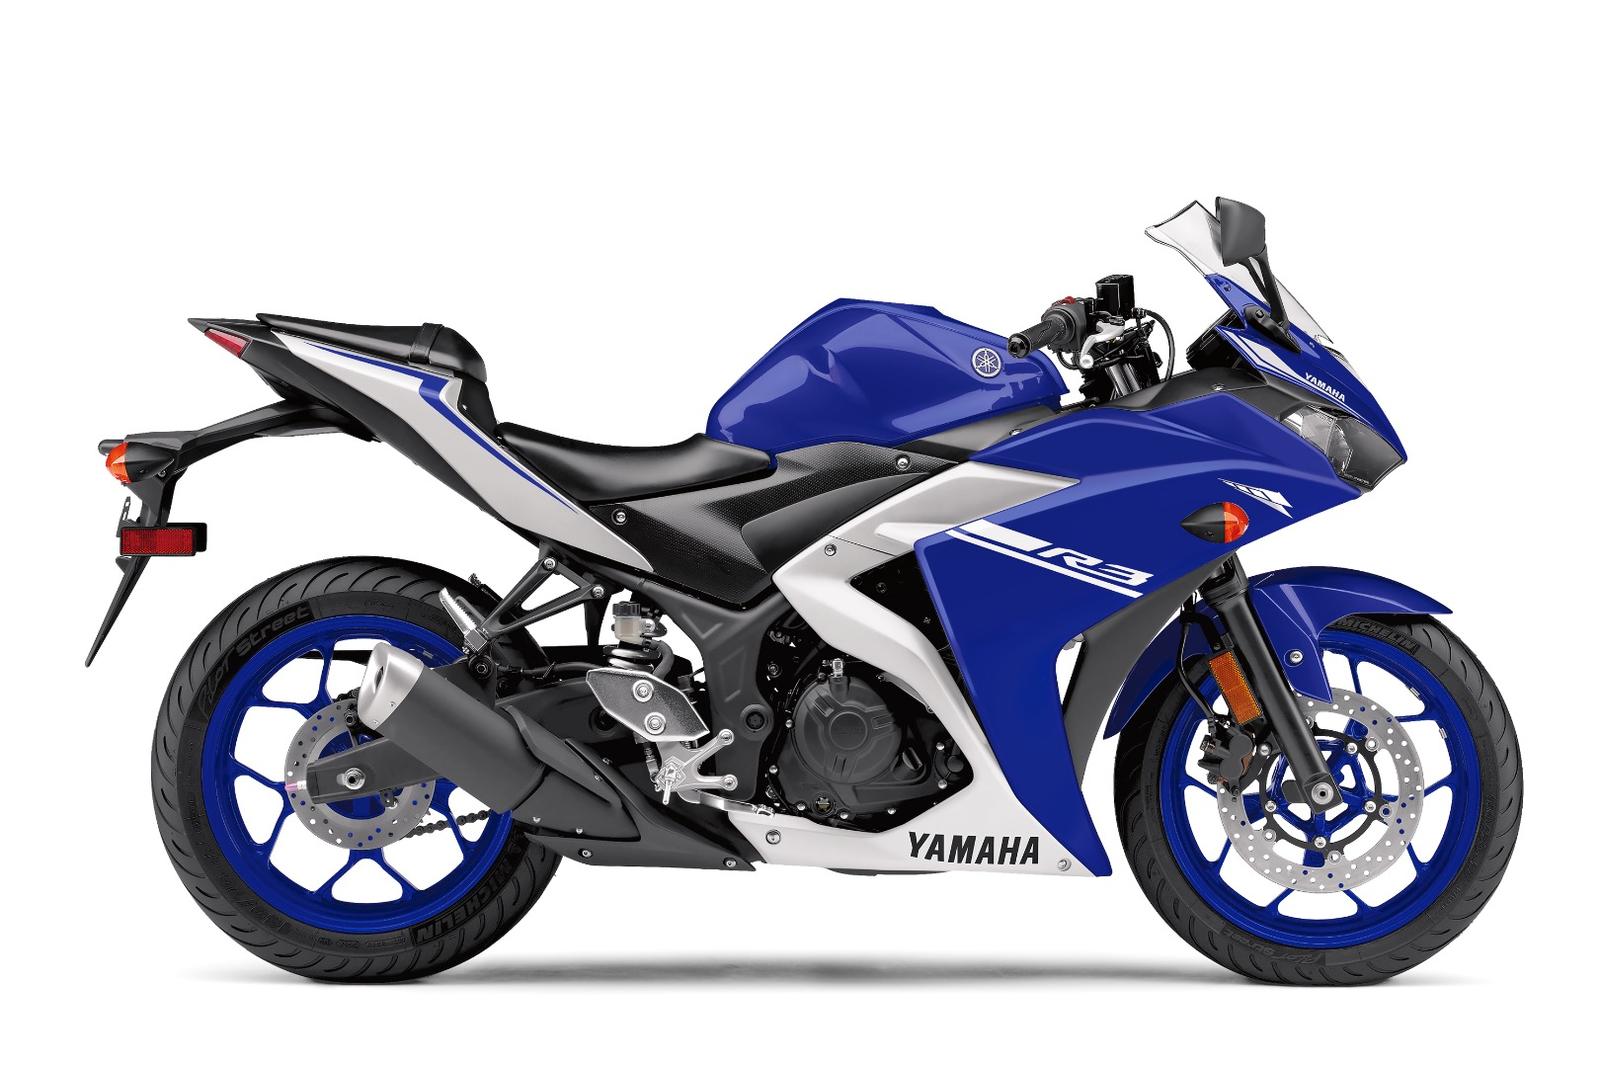 2017-yamaha-yzf-r3-review-motorcycle-6